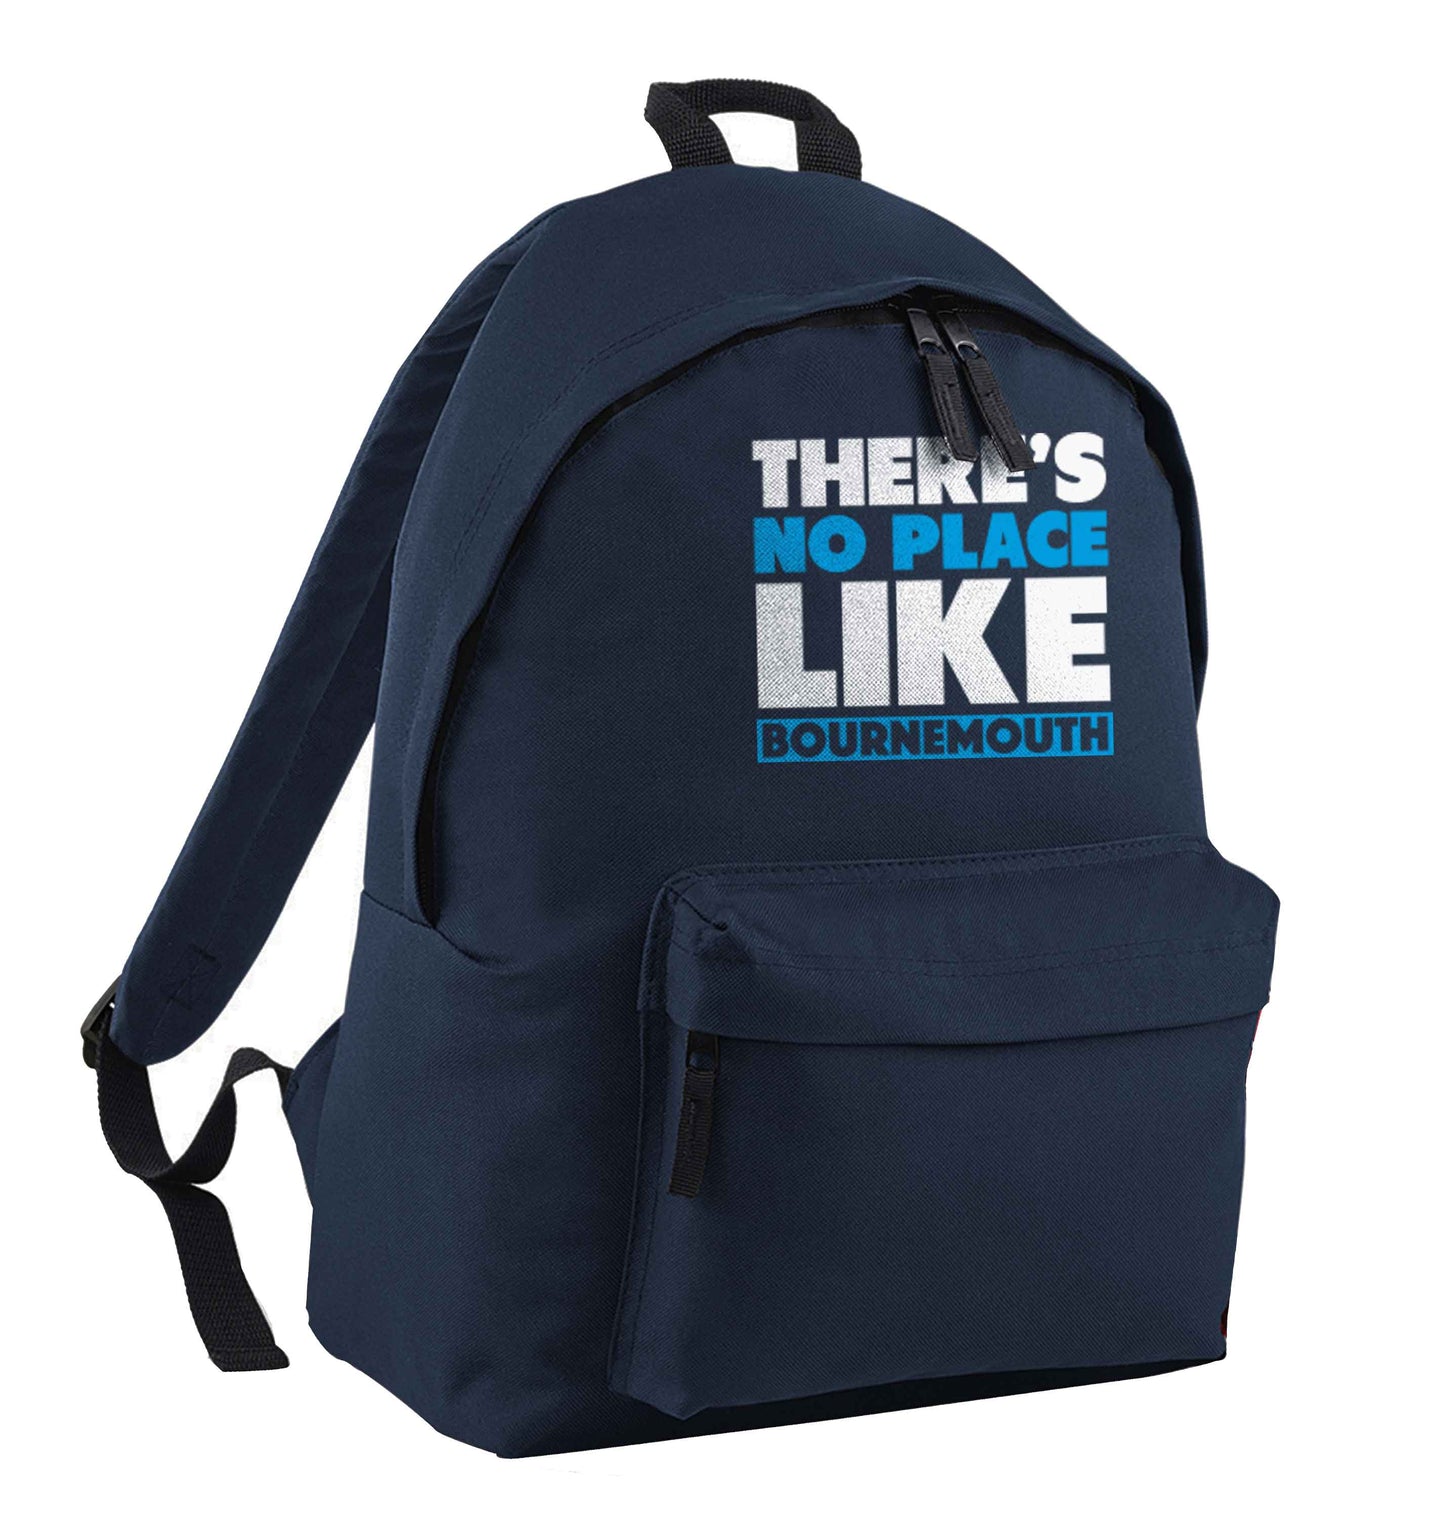 There's no place like Bournemouth navy adults backpack